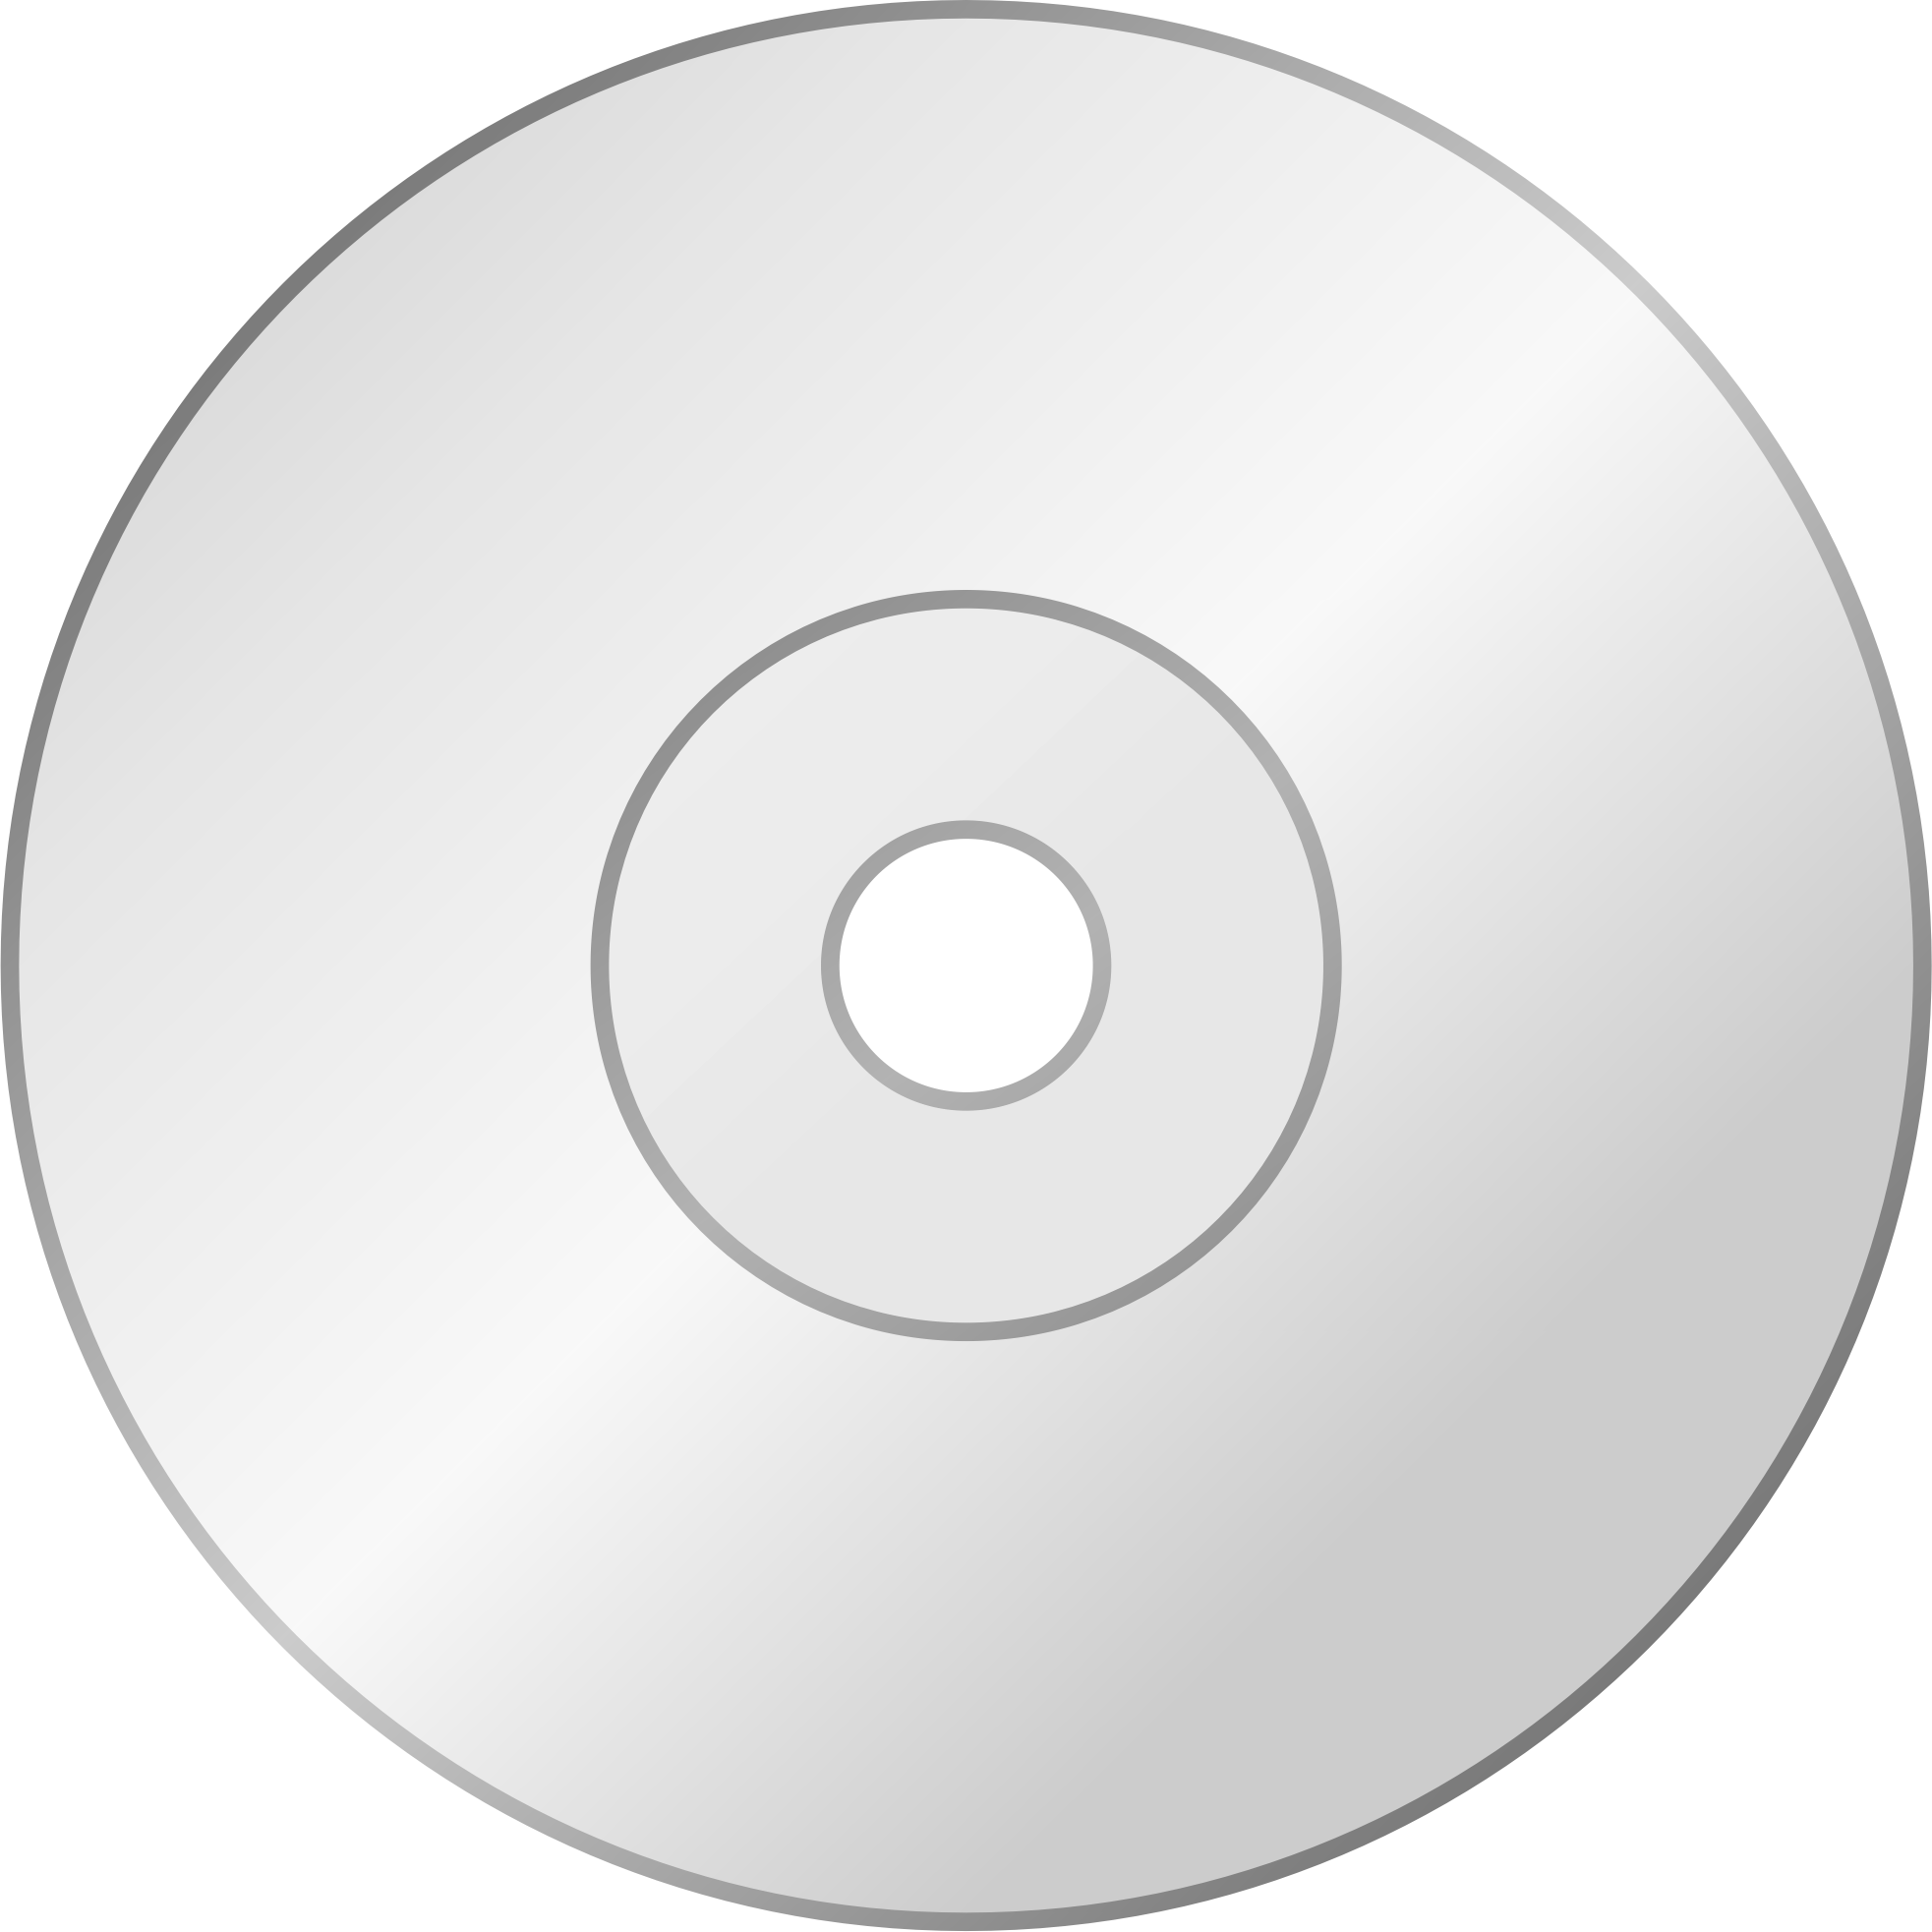 Vector Disk Silver Cd Download HQ PNG Image